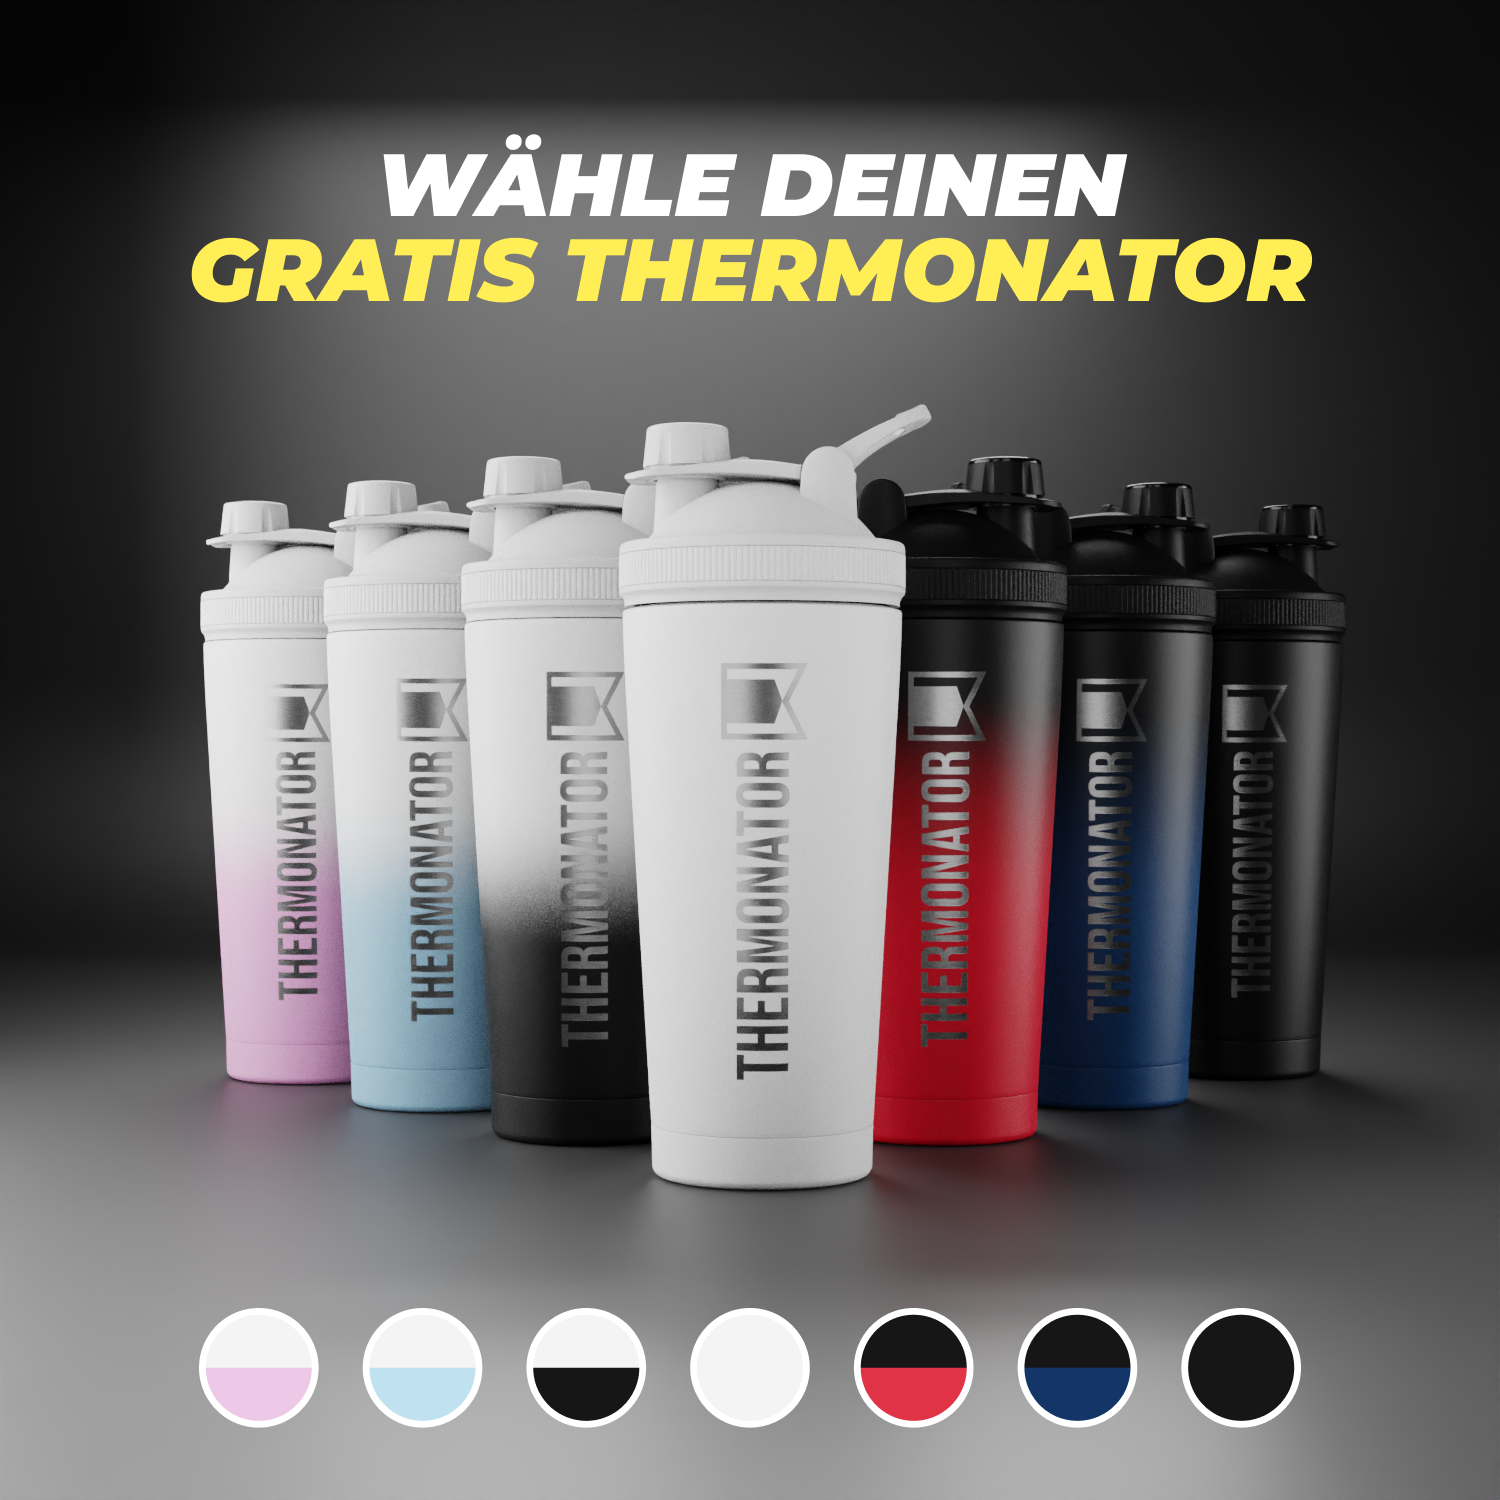 ALL YOU CAN DRINK BUNDLE | 3x Thermo Bottle + GRATIS Thermonator + GRATIS Thermo Cup + GRATIS E-BOOK | BPA FREI